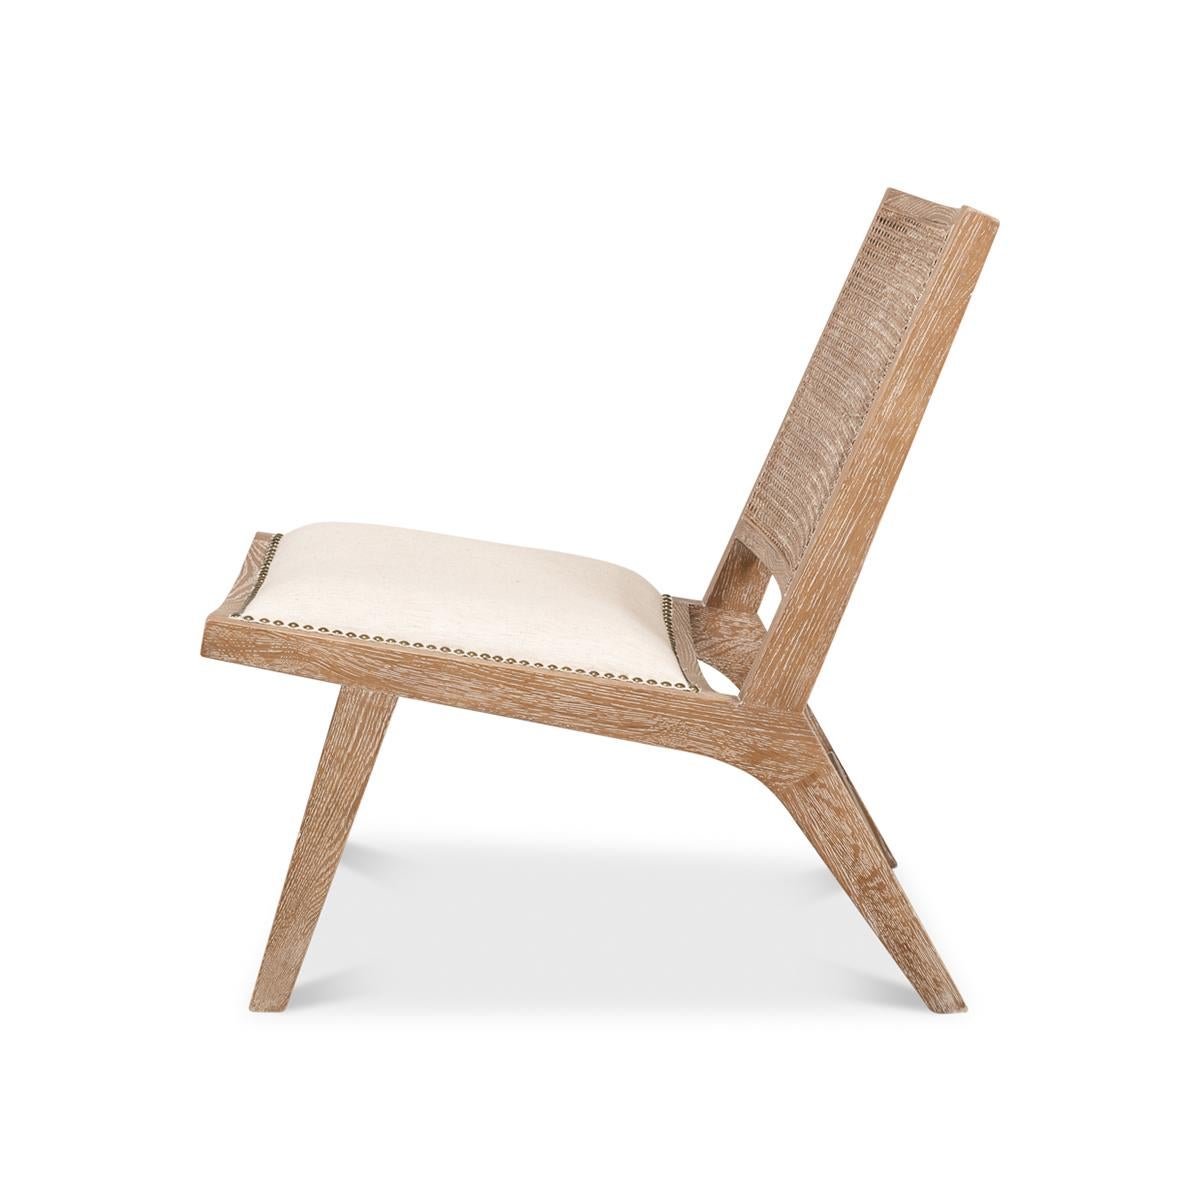 A low-slung side chair. With a natural lightly whitewashed frame, an inset caned backrest and an off-white linen upholstered seat.

 Dimensions: 22